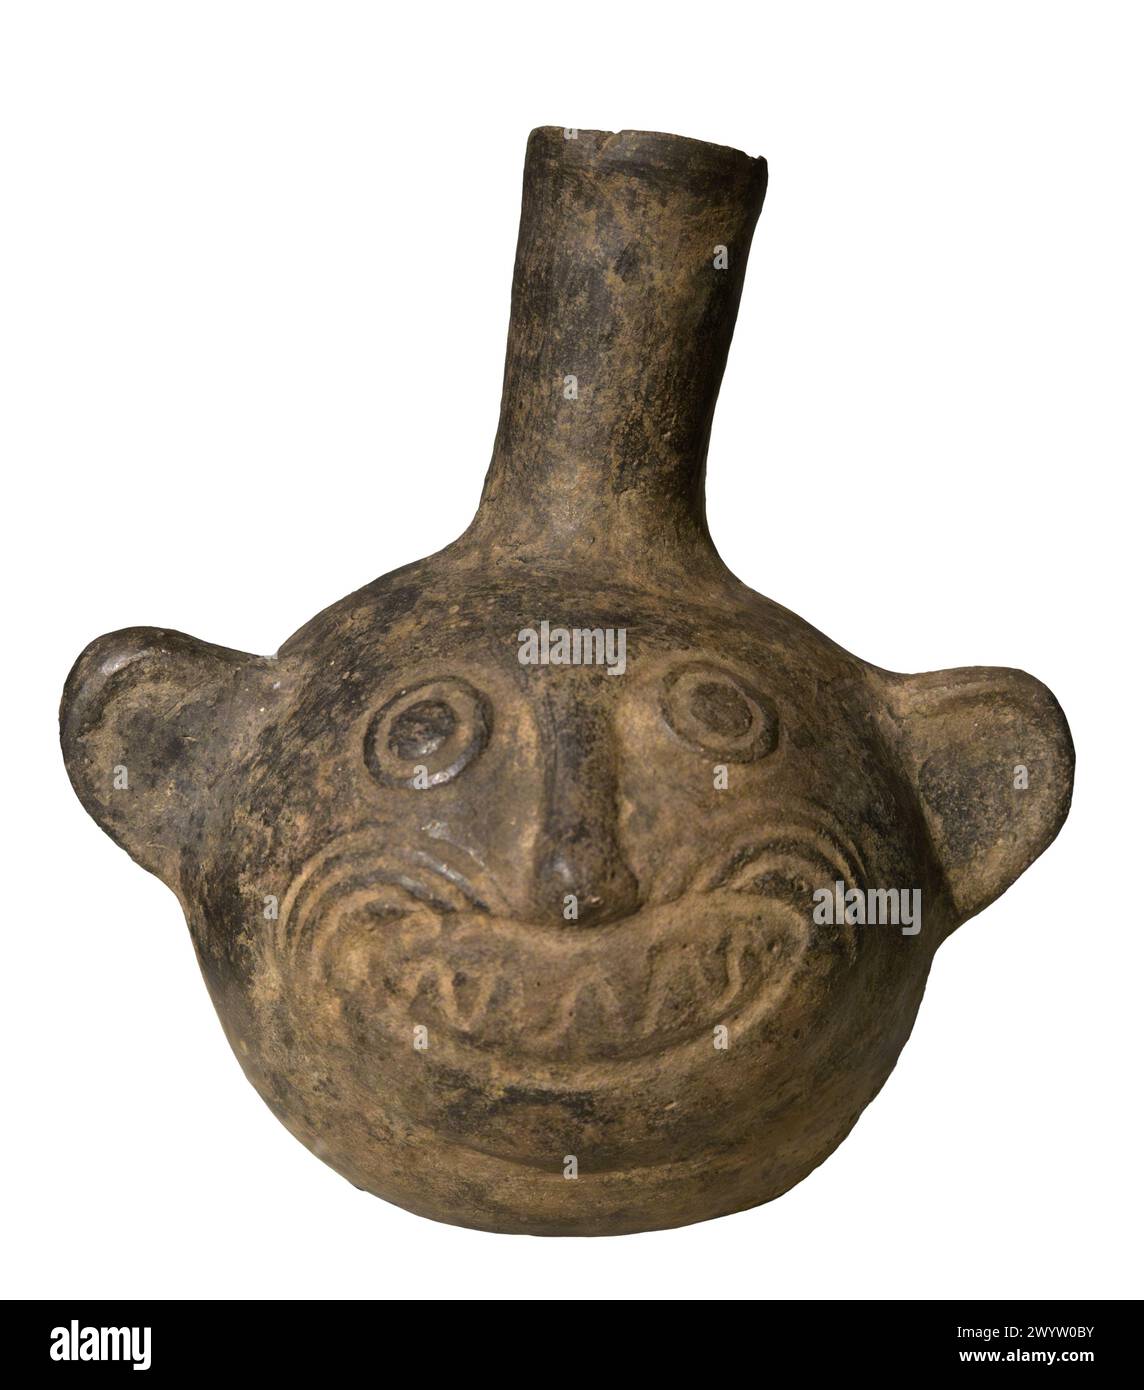 Ceramic bottle vessel Huacos of the Moche culture. Stock Photo